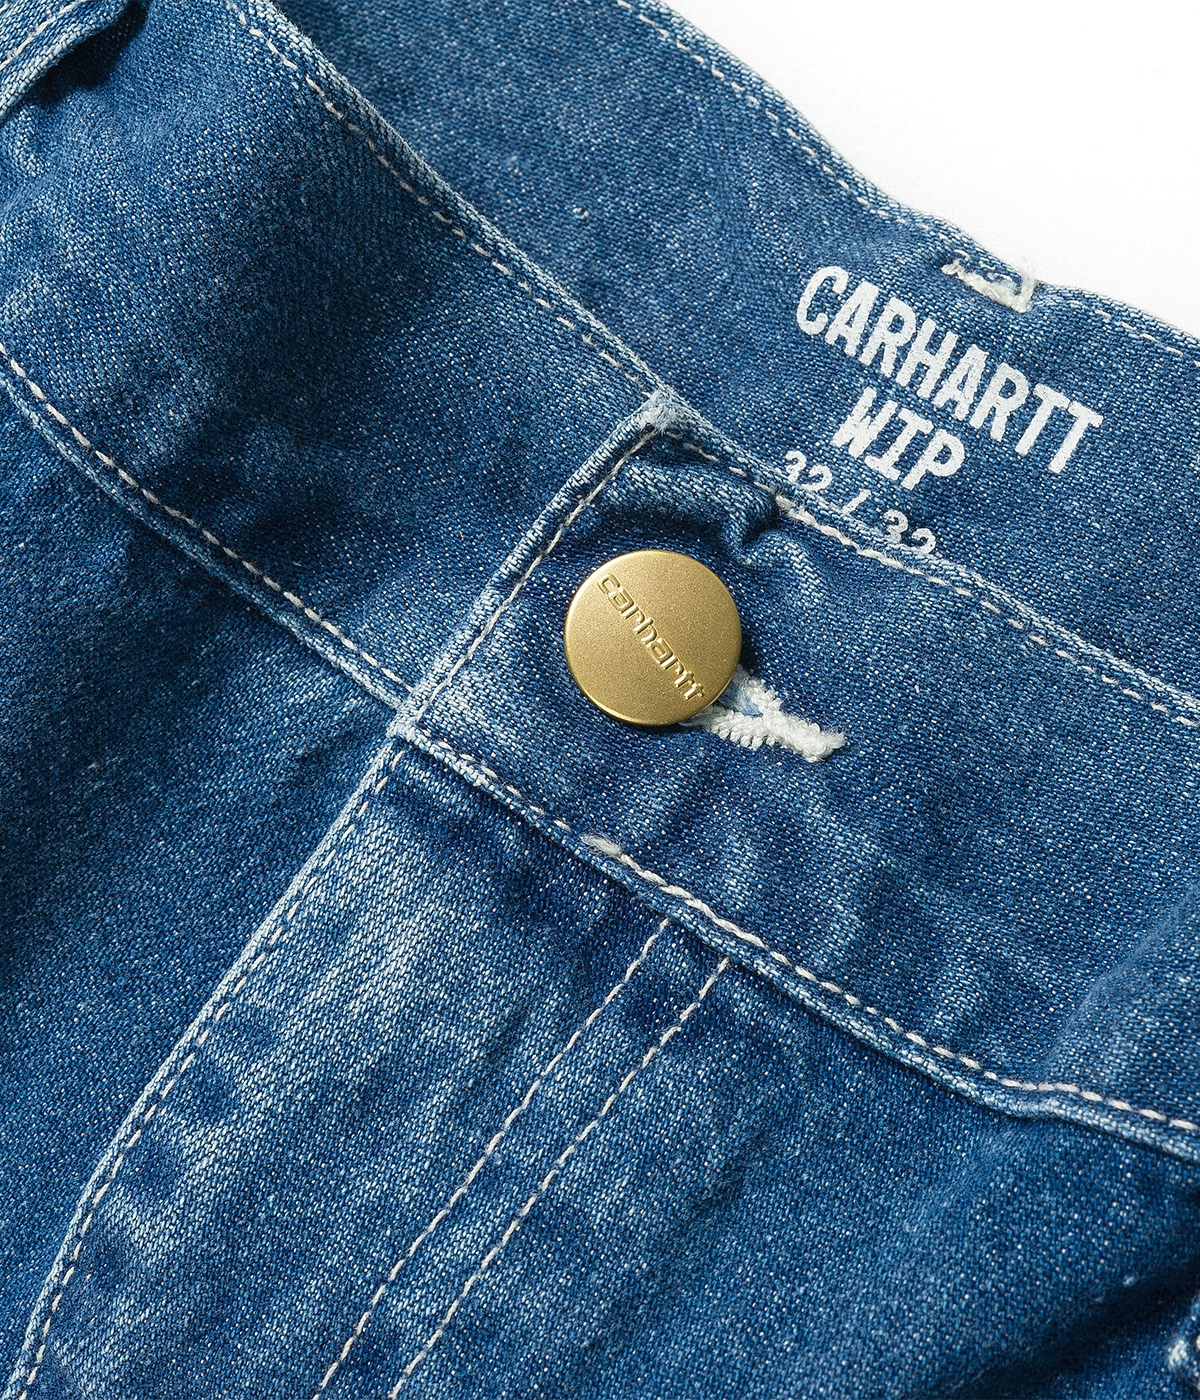 Carhartt Pant Simple Blue/Stone washed 5